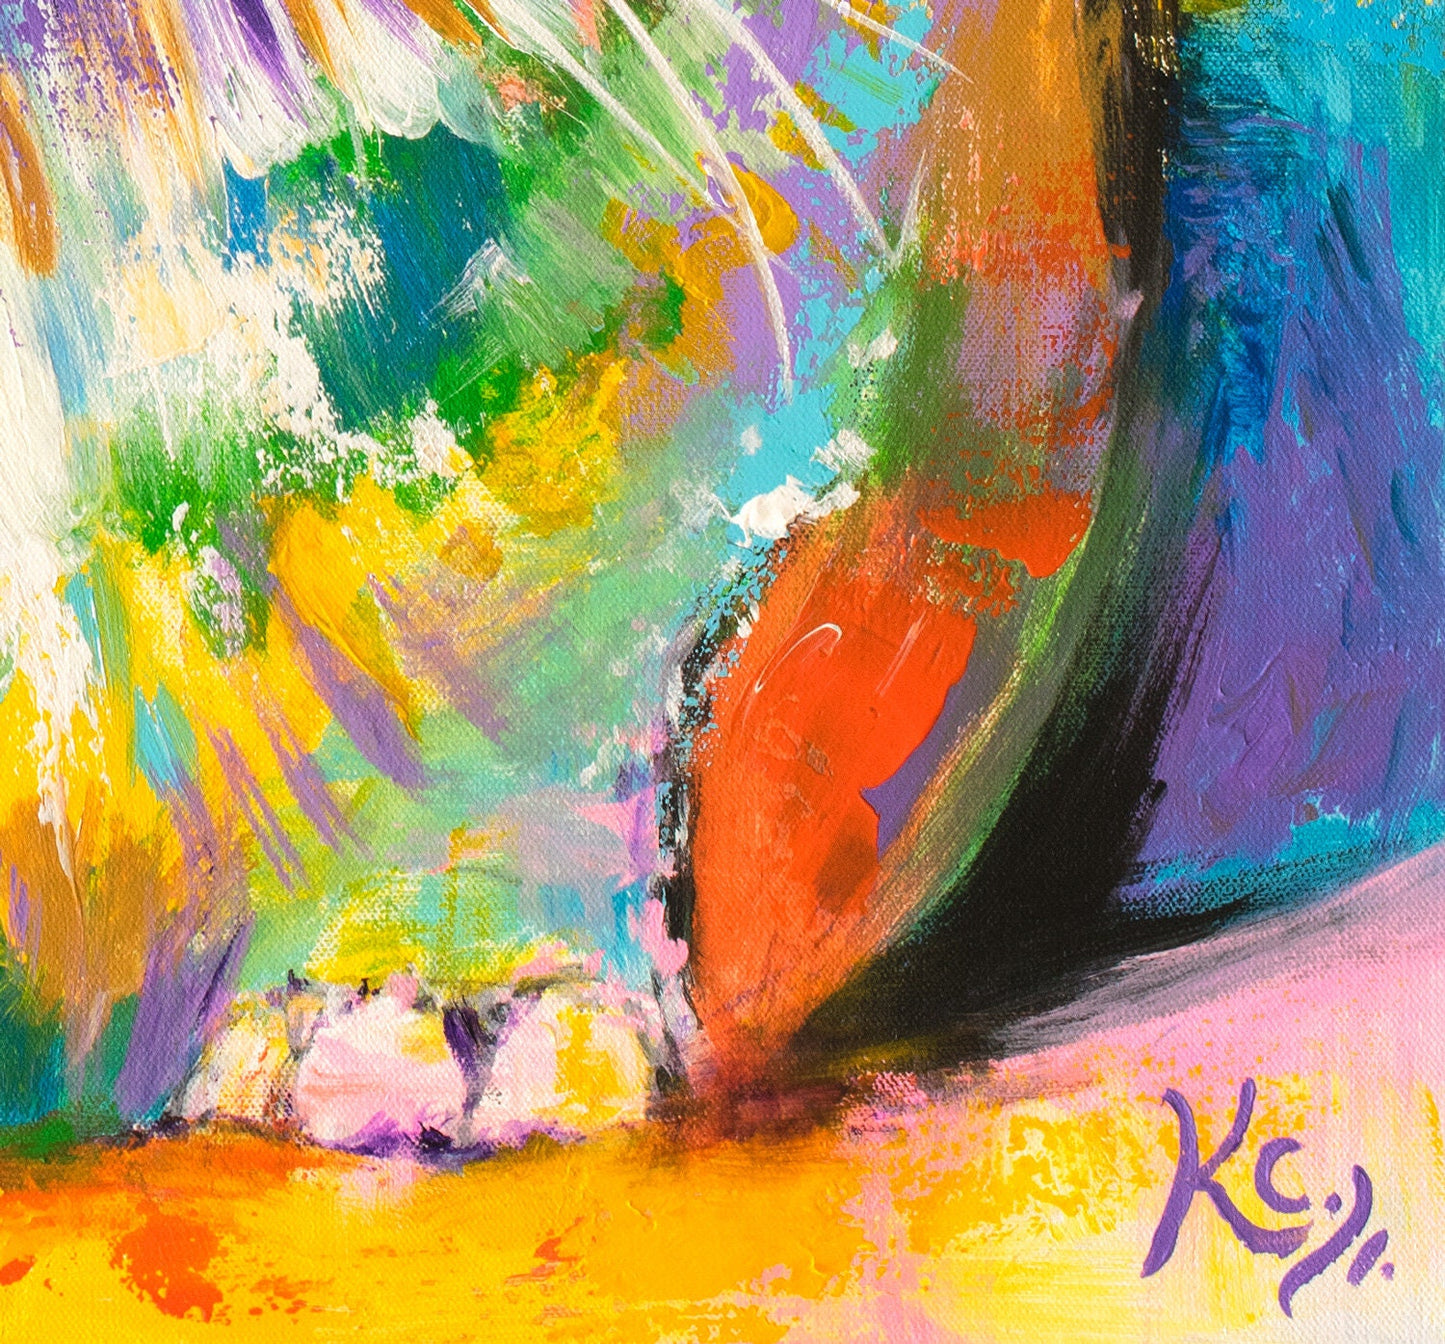 Abstract Cat Painting - Modern Cat Art Print on CANVAS or PAPER for Wall Decor or Gifts by Krystle Cole